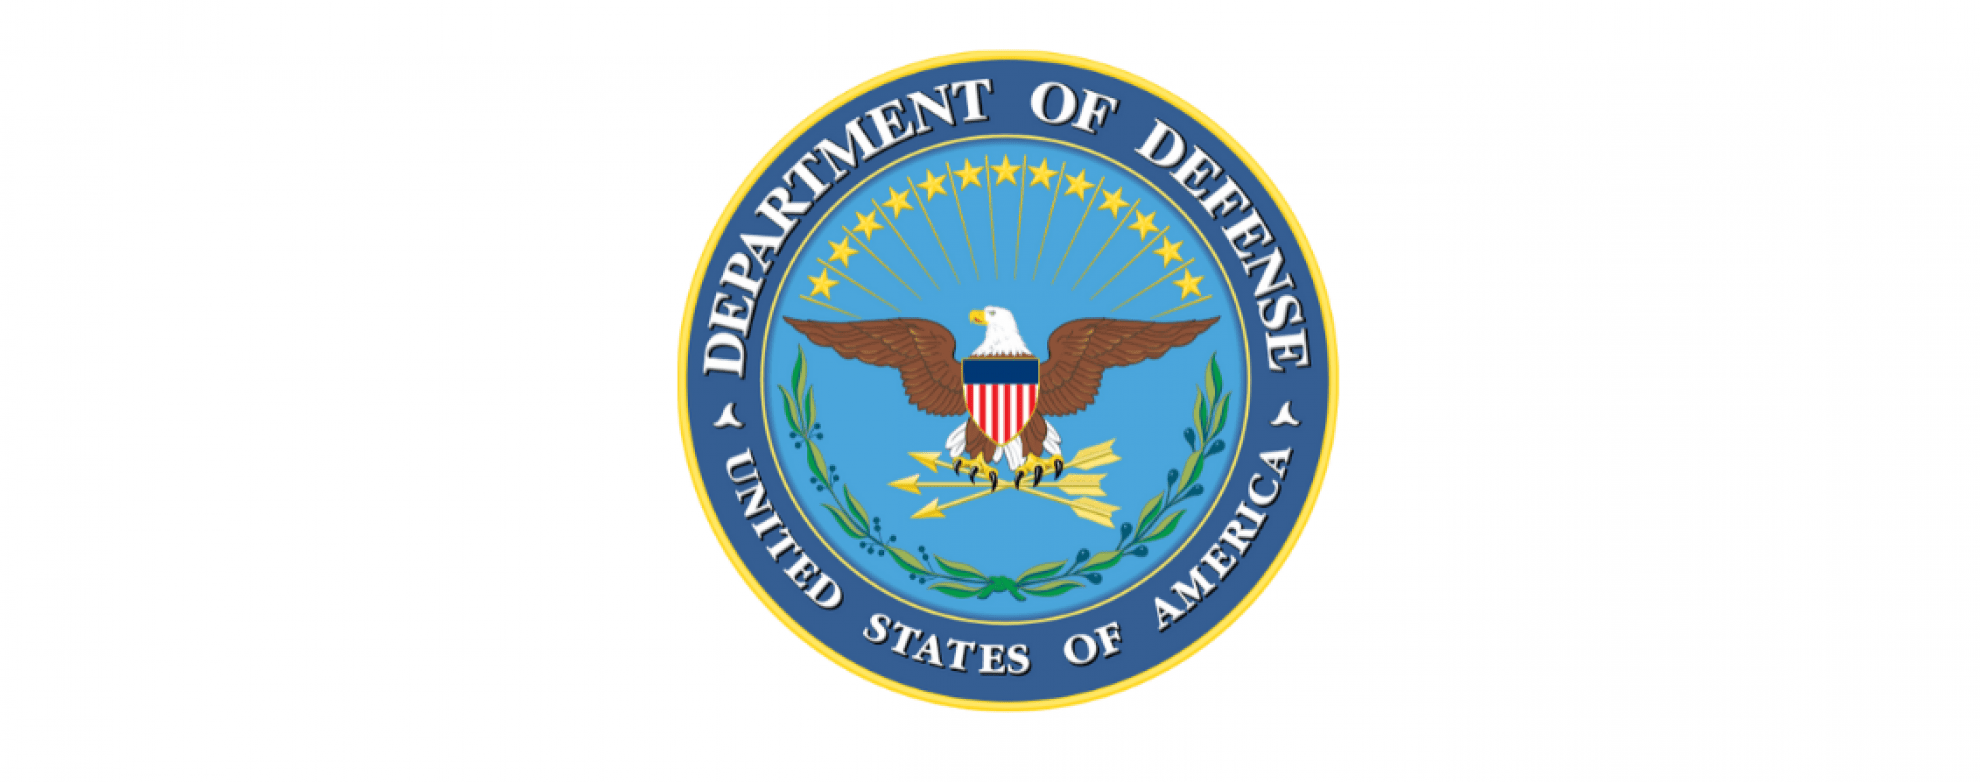 USTRANSCOM: $20 Billion contract for military household goods moves delayed until fall 2022